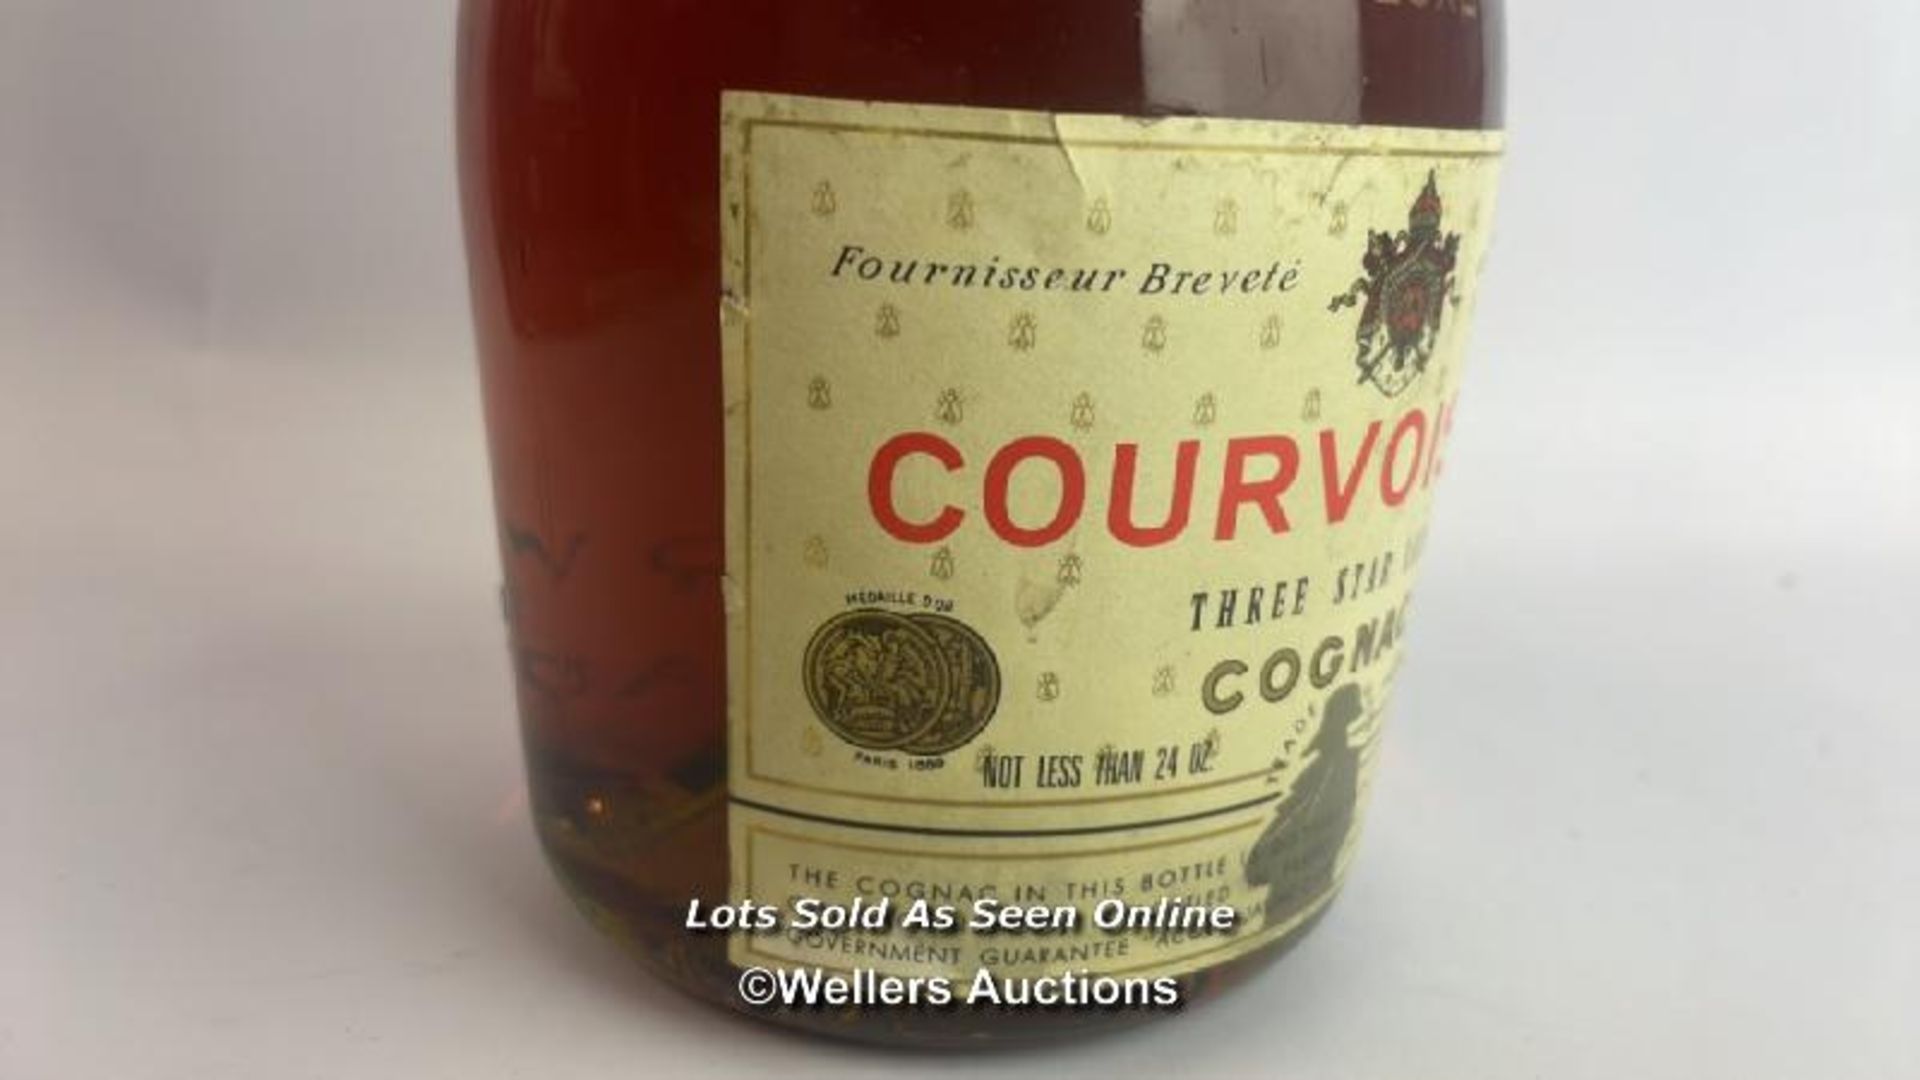 Courvoisier 3 Star Luxe Cognac, 24oz, Includes cannon style Couroisier branded pourer / Please see - Image 7 of 10